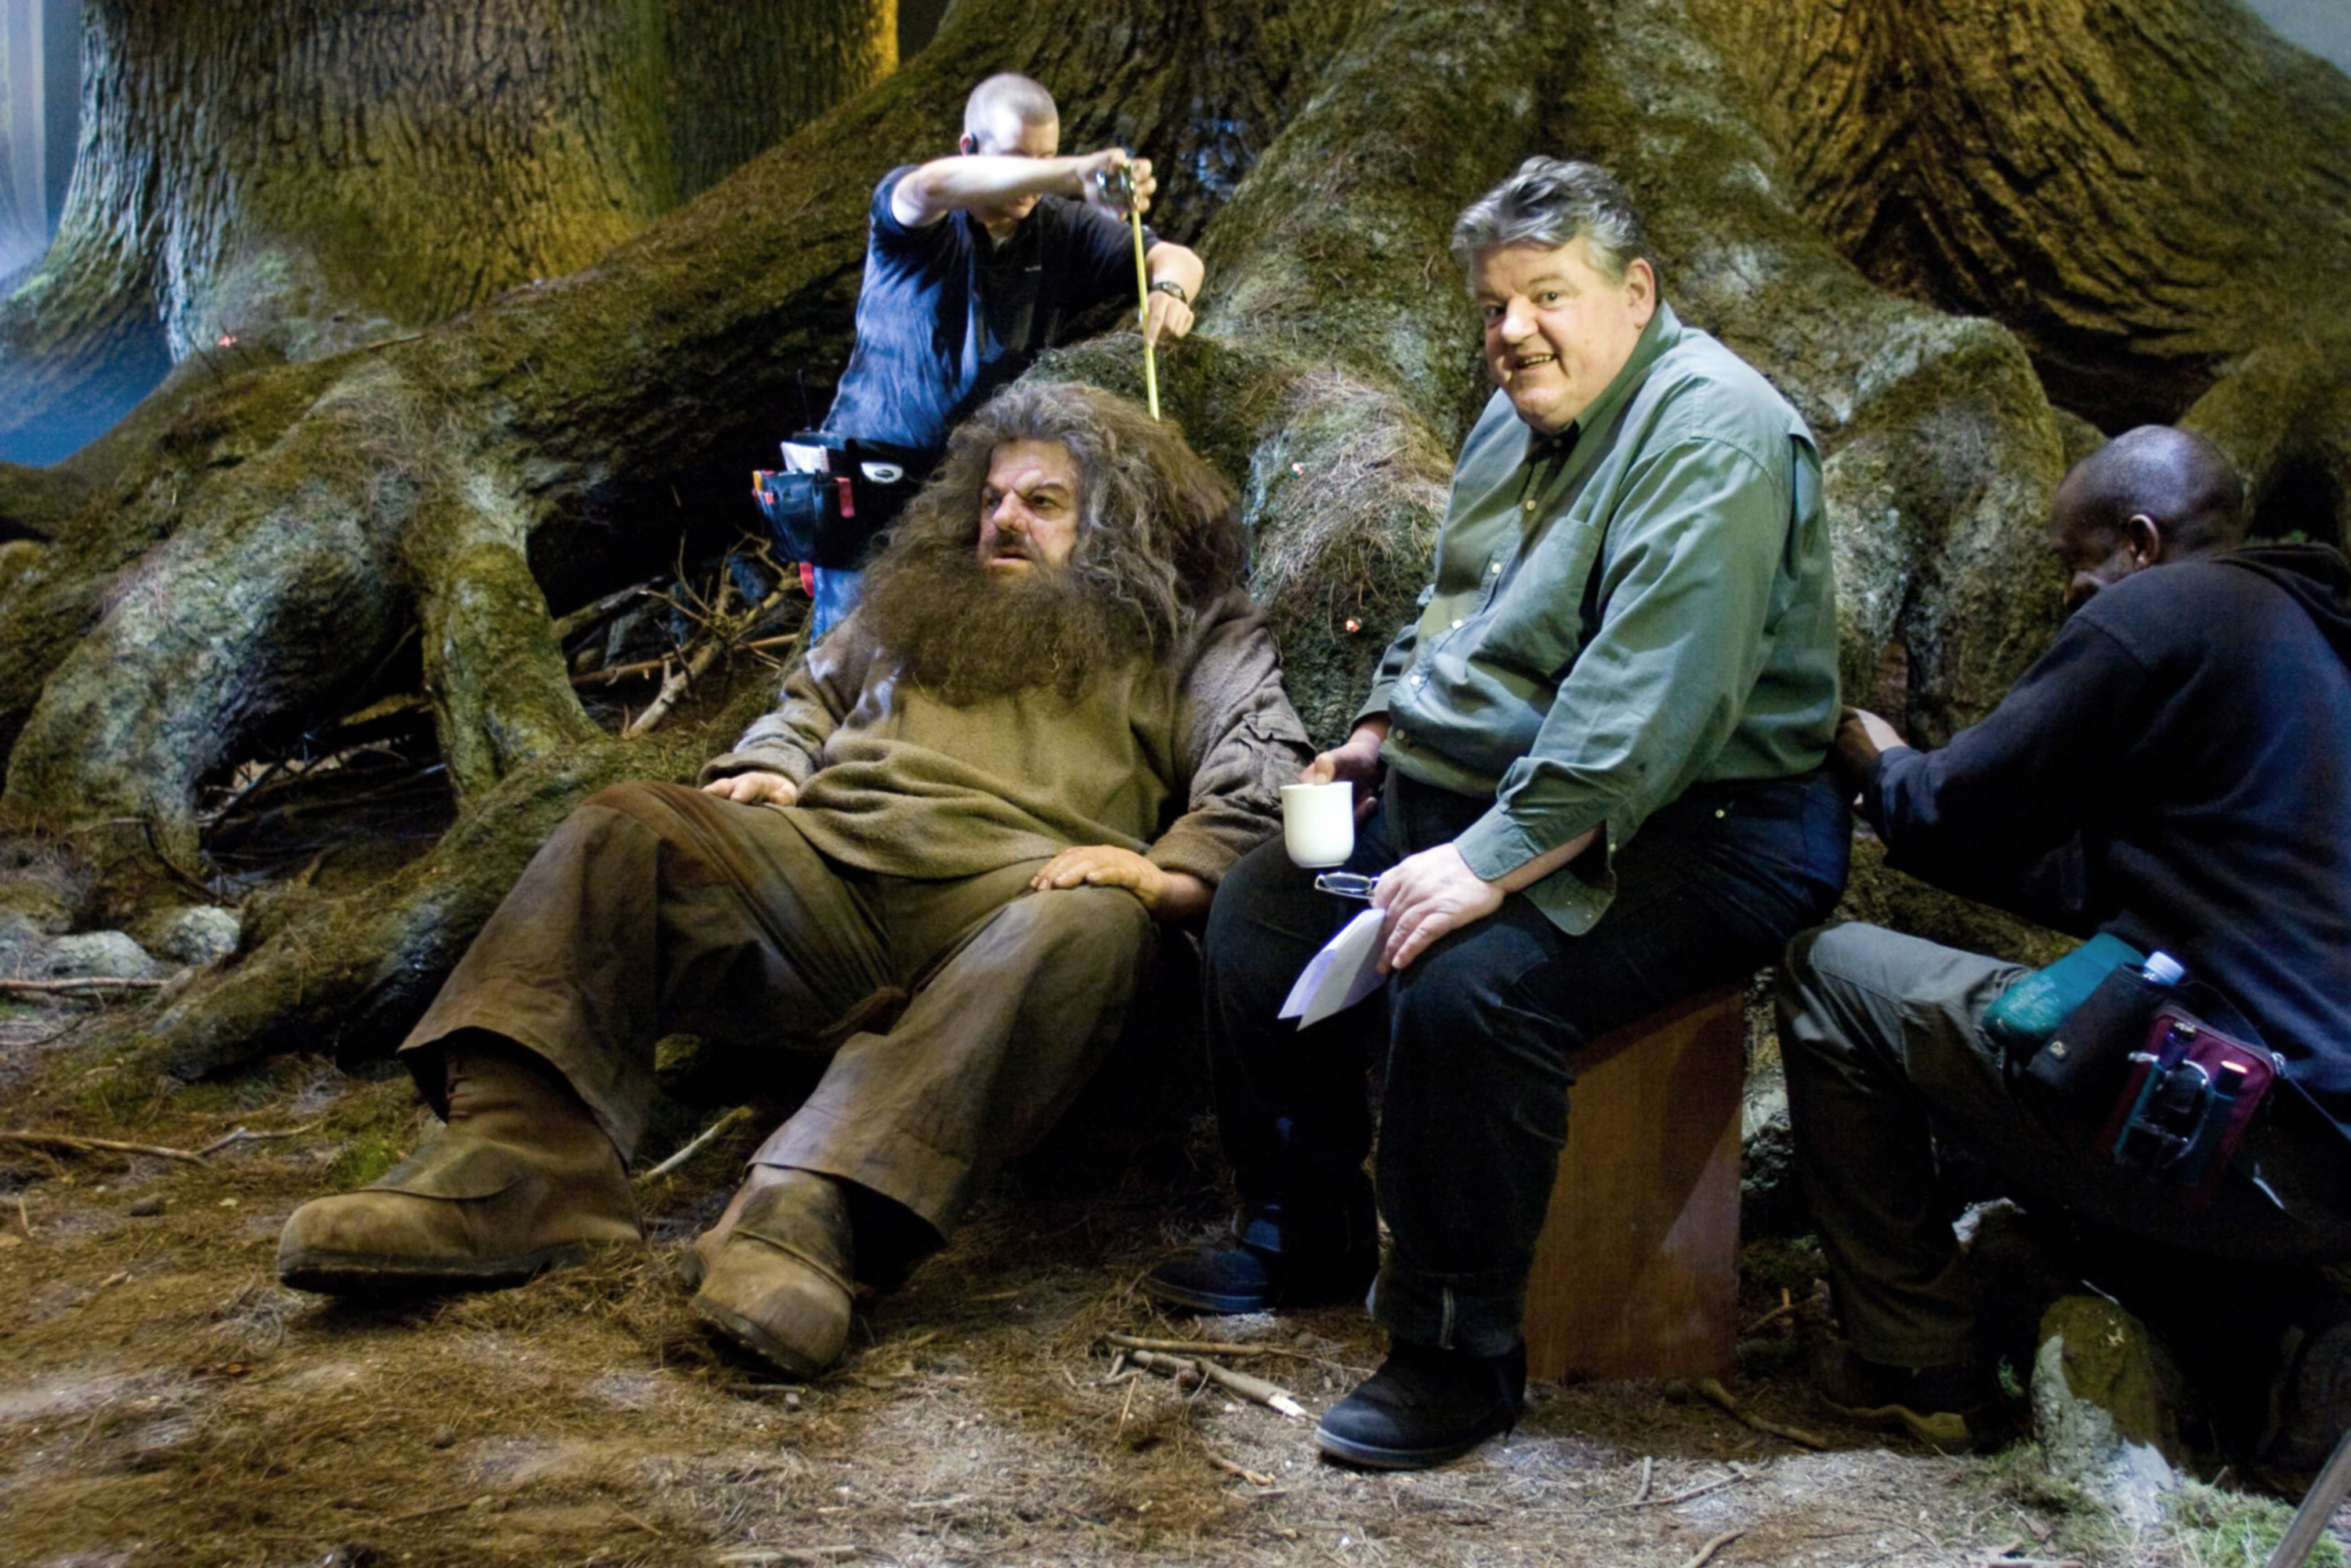 the actor for Hagrid, Robbie Coltrane, posing next to a fake human-sized doll Hagrid